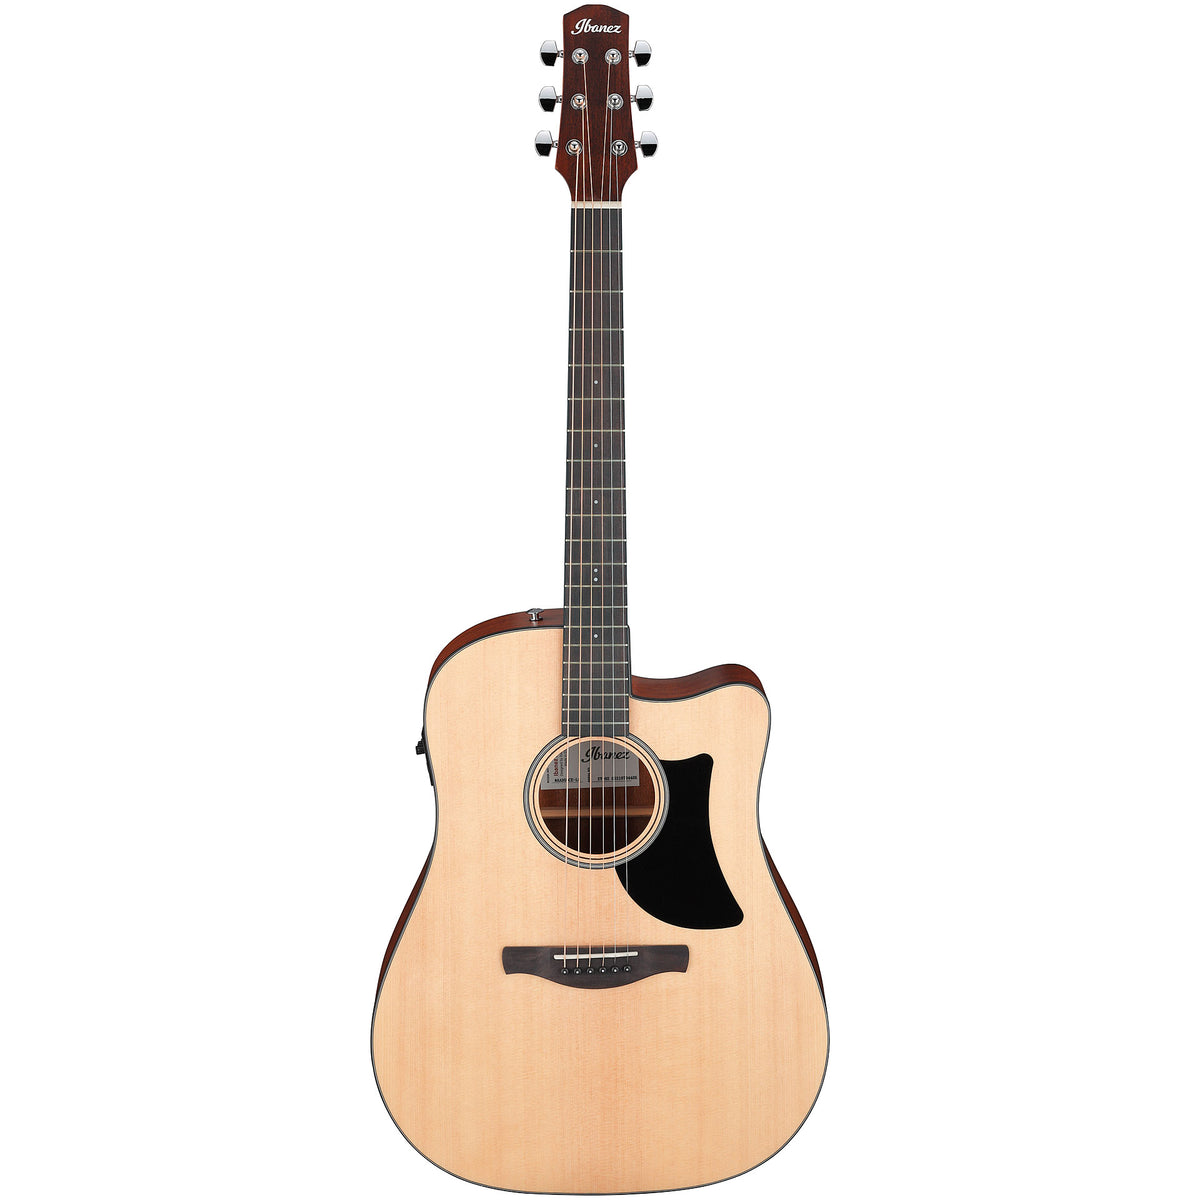 Ibanez AAD50CE-LG Dreadnought Acoustic Electric Guitar - Natural Low Gloss | Musical Instruments | Musical Instruments, Musical Instruments. Musical Instruments: Electro Acoustic Guitar, Musical Instruments. Musical Instruments: Guitars | Ibanez